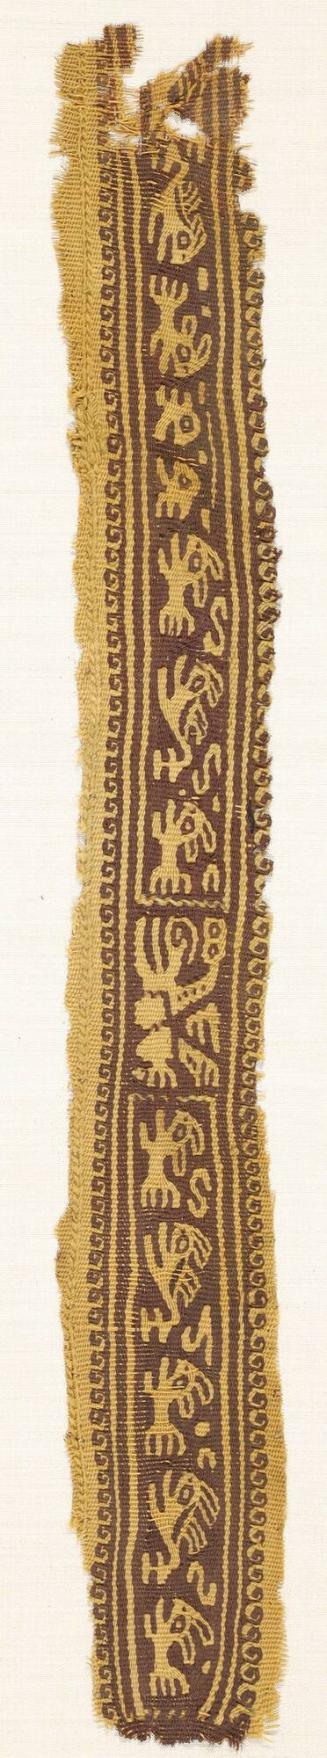 Tunic Strip Decorated with Horizontal Frieze of Running Rabbits